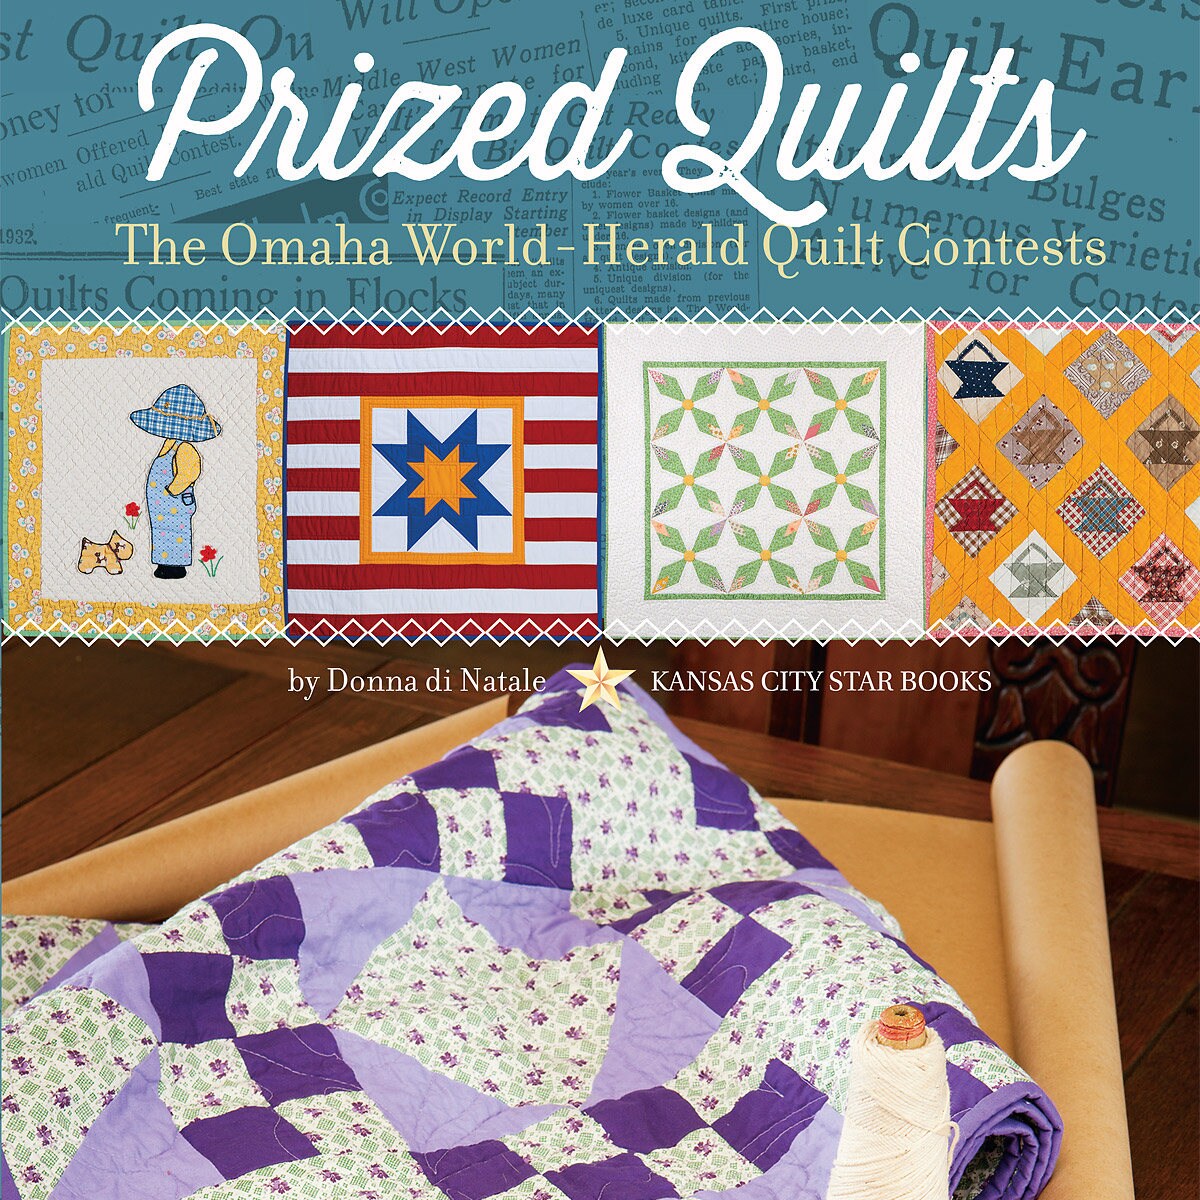 Prized Quilts Quilt Pattern Book by Donna Di Natale for Kansas City Star Quilts